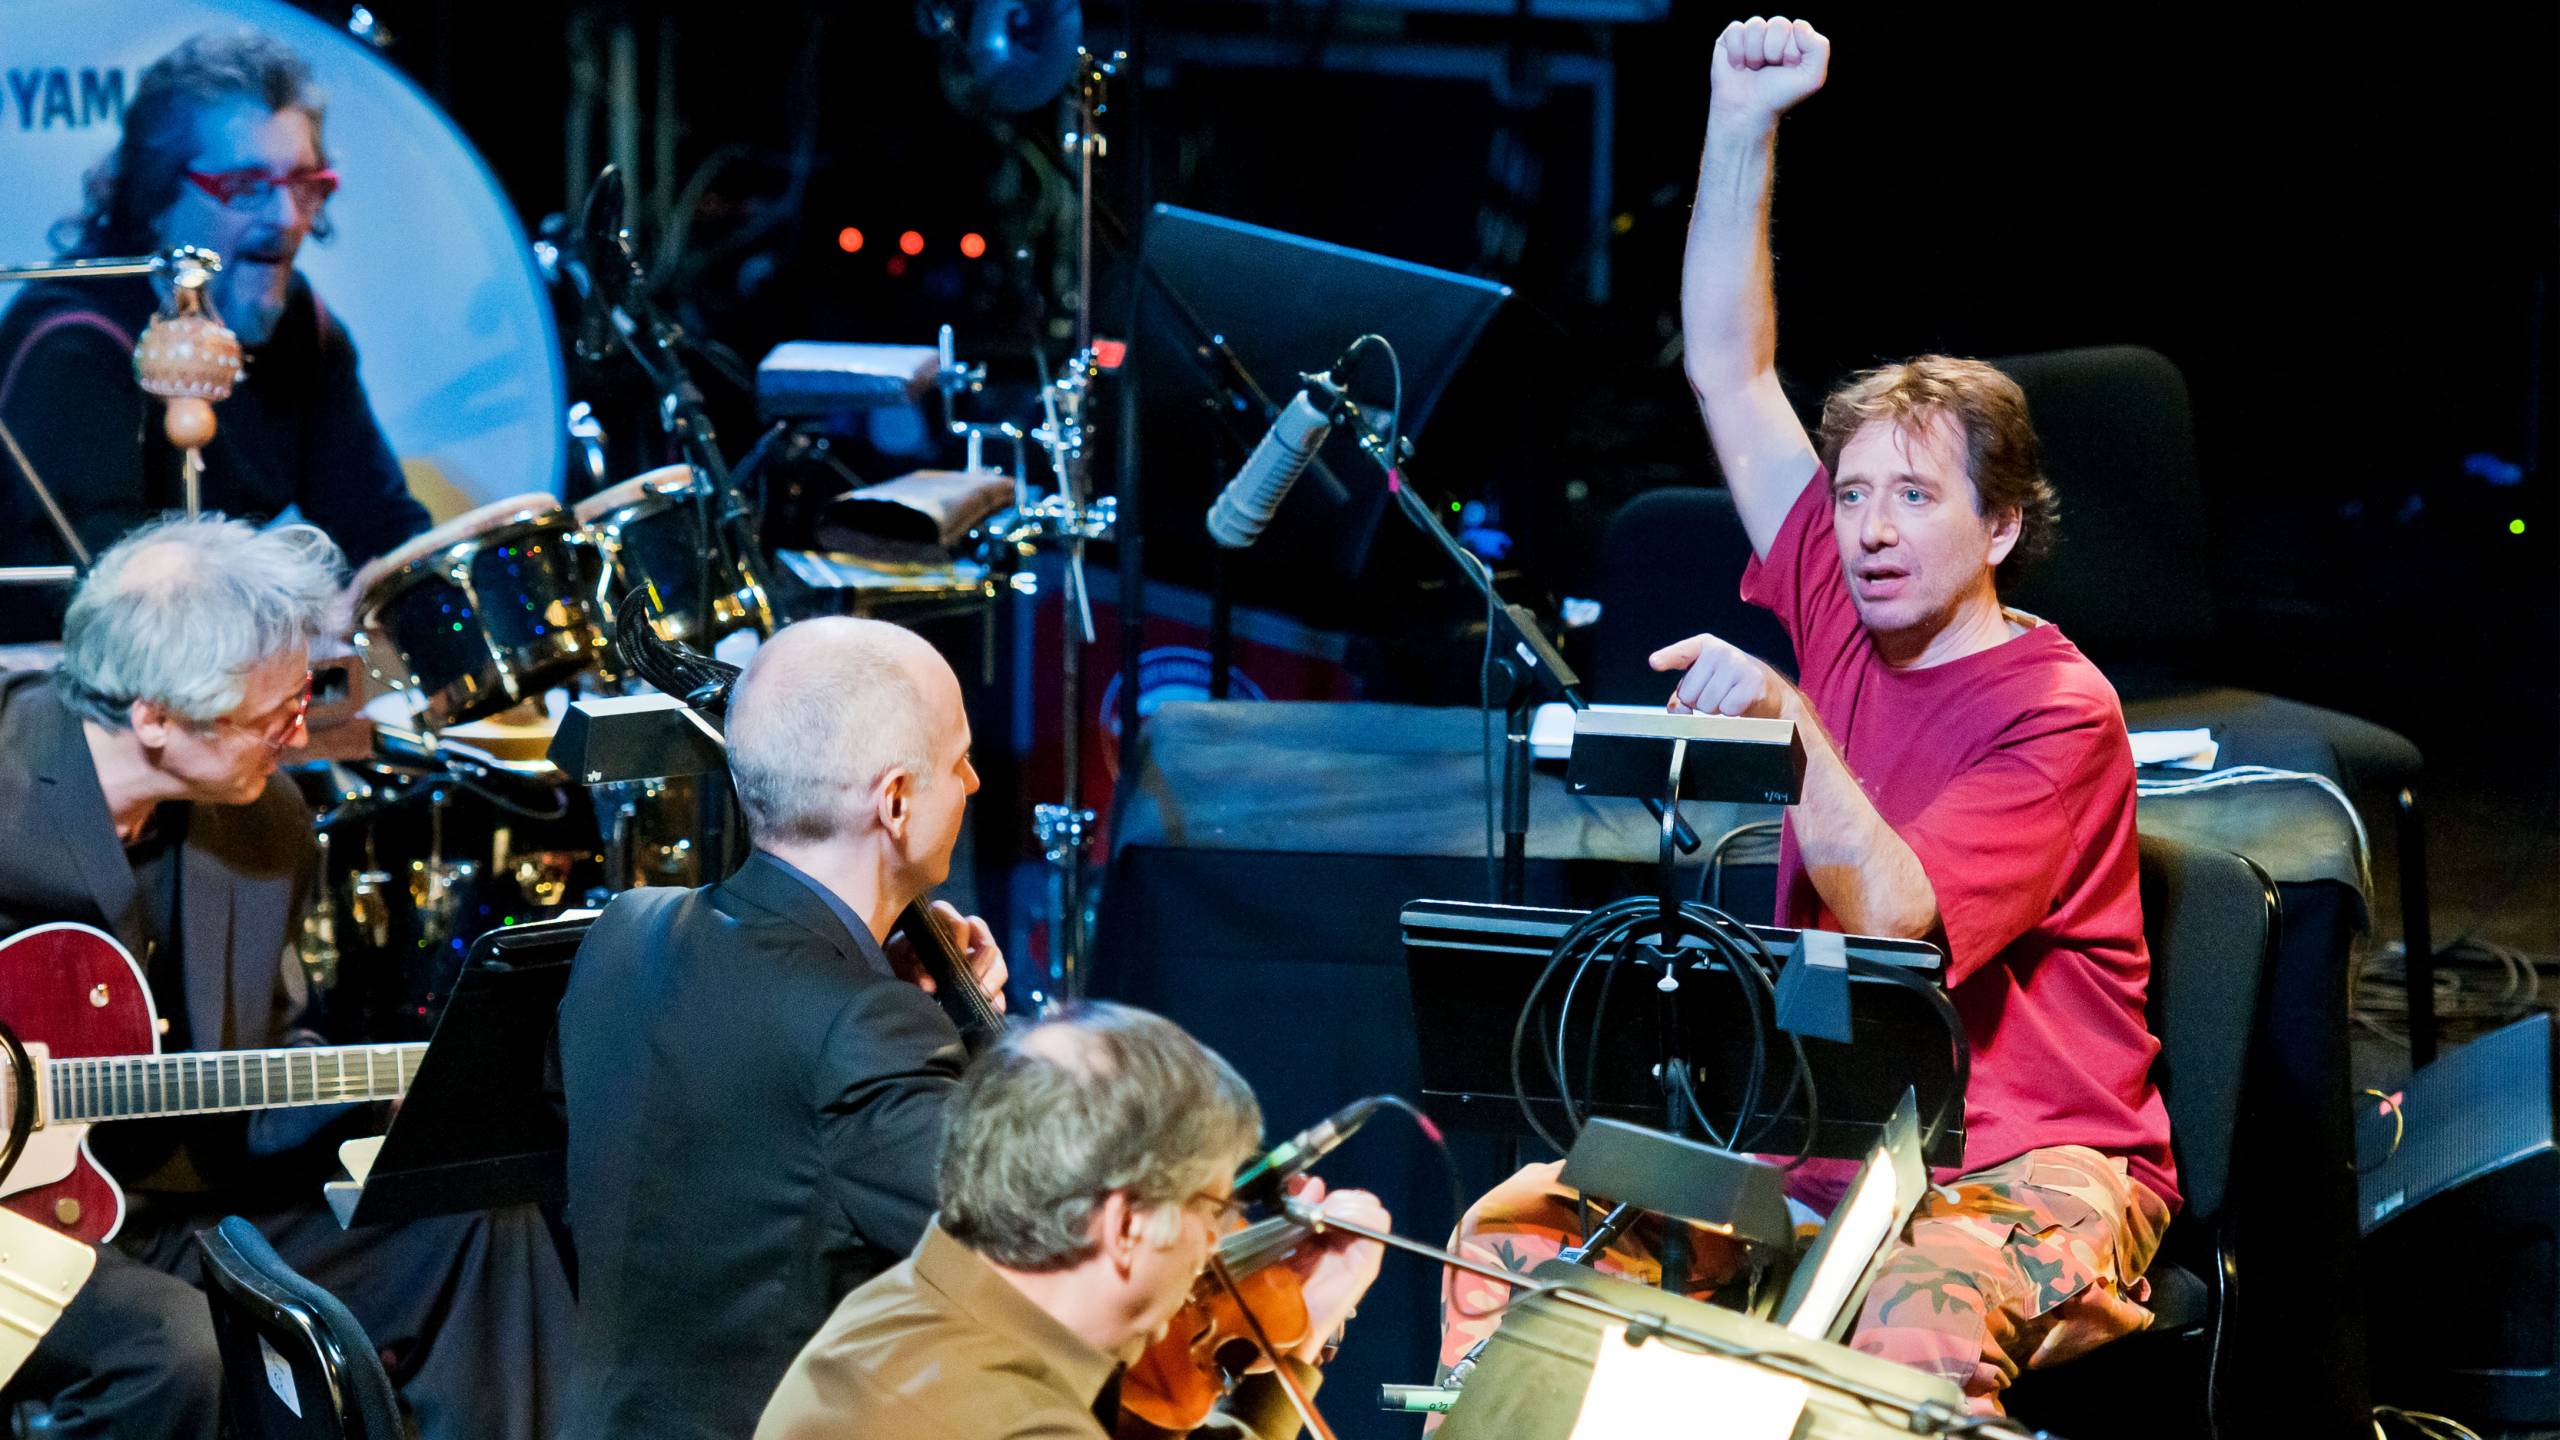 John Zorn conducts music from his 'Book of Angels' at New York's Lincoln Center in 2011. New York, March 30, 2011.